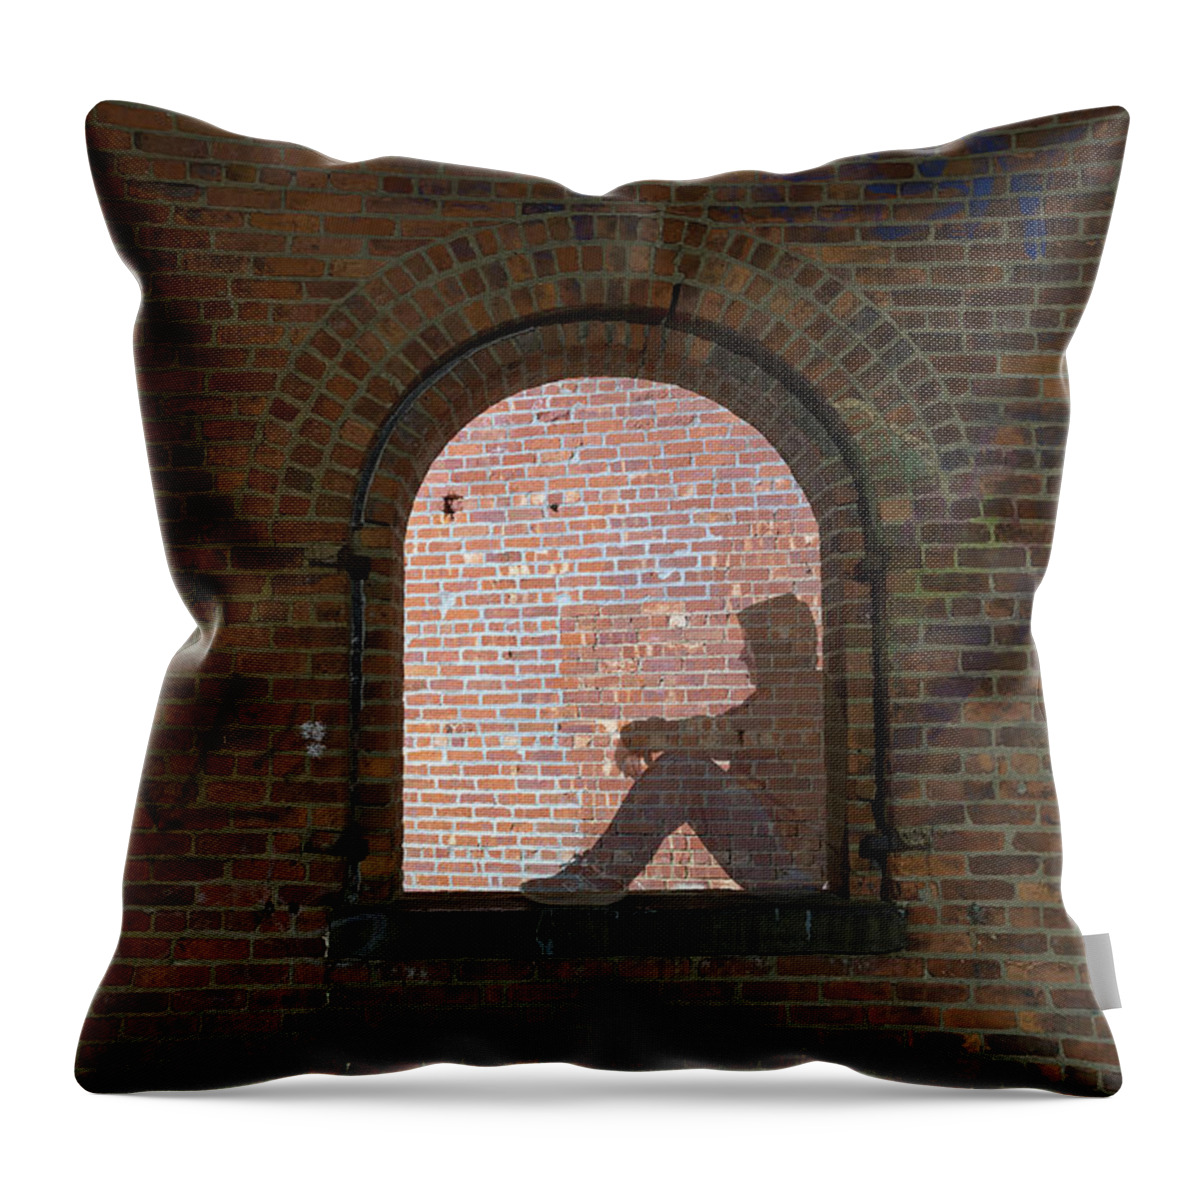 Selfie Throw Pillow featuring the photograph Fading by Brian Knott Photography